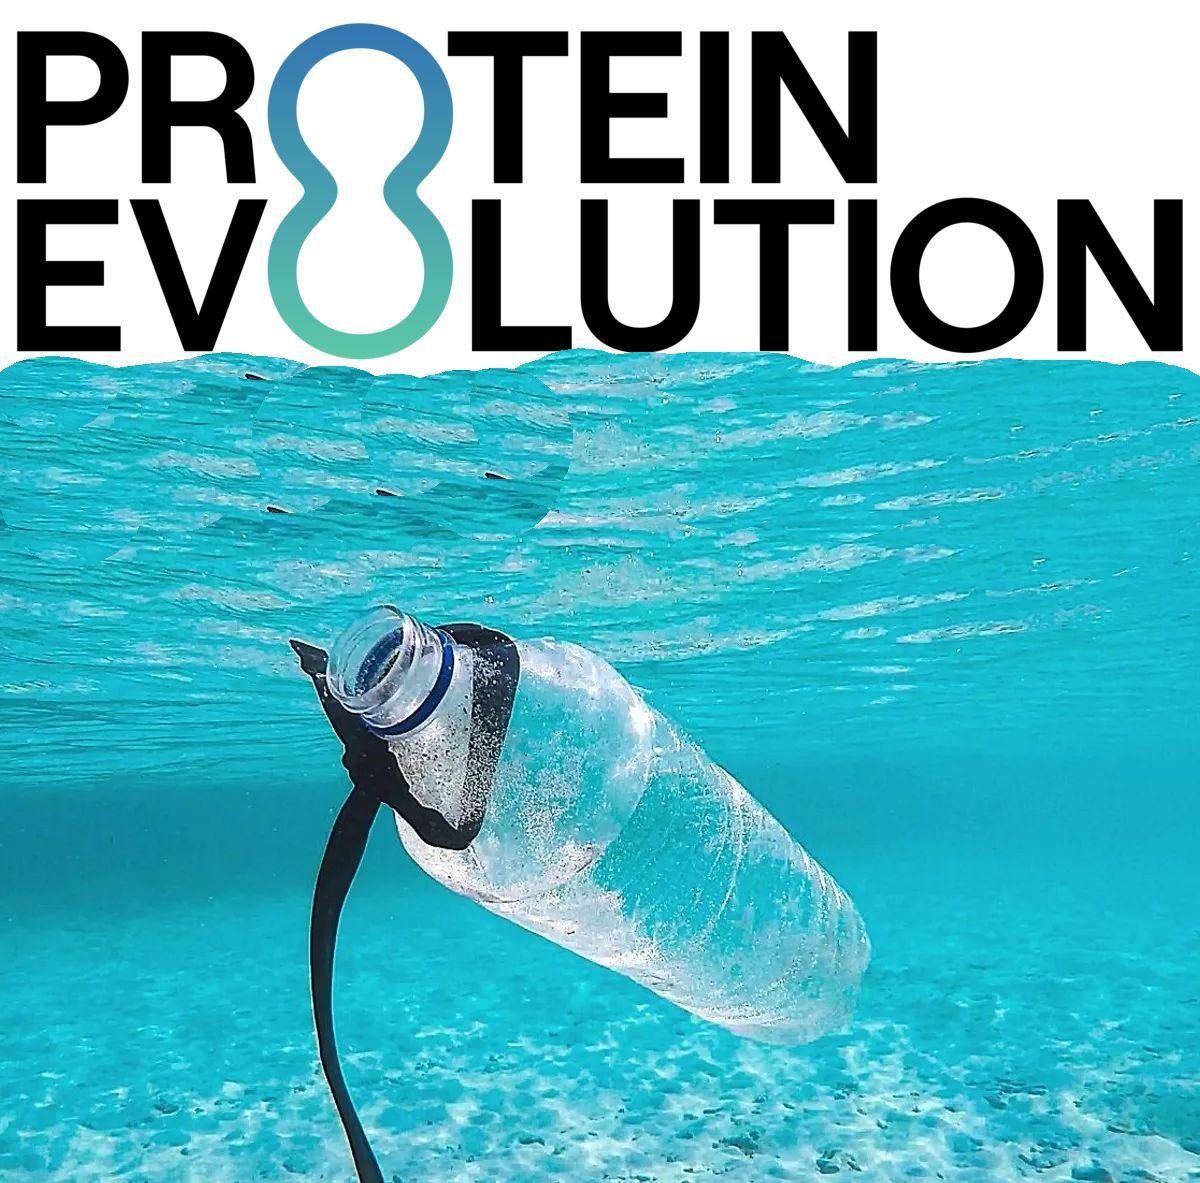 Protein Evolution's New Technology Can Recycle Plastic Waste Indefinitely